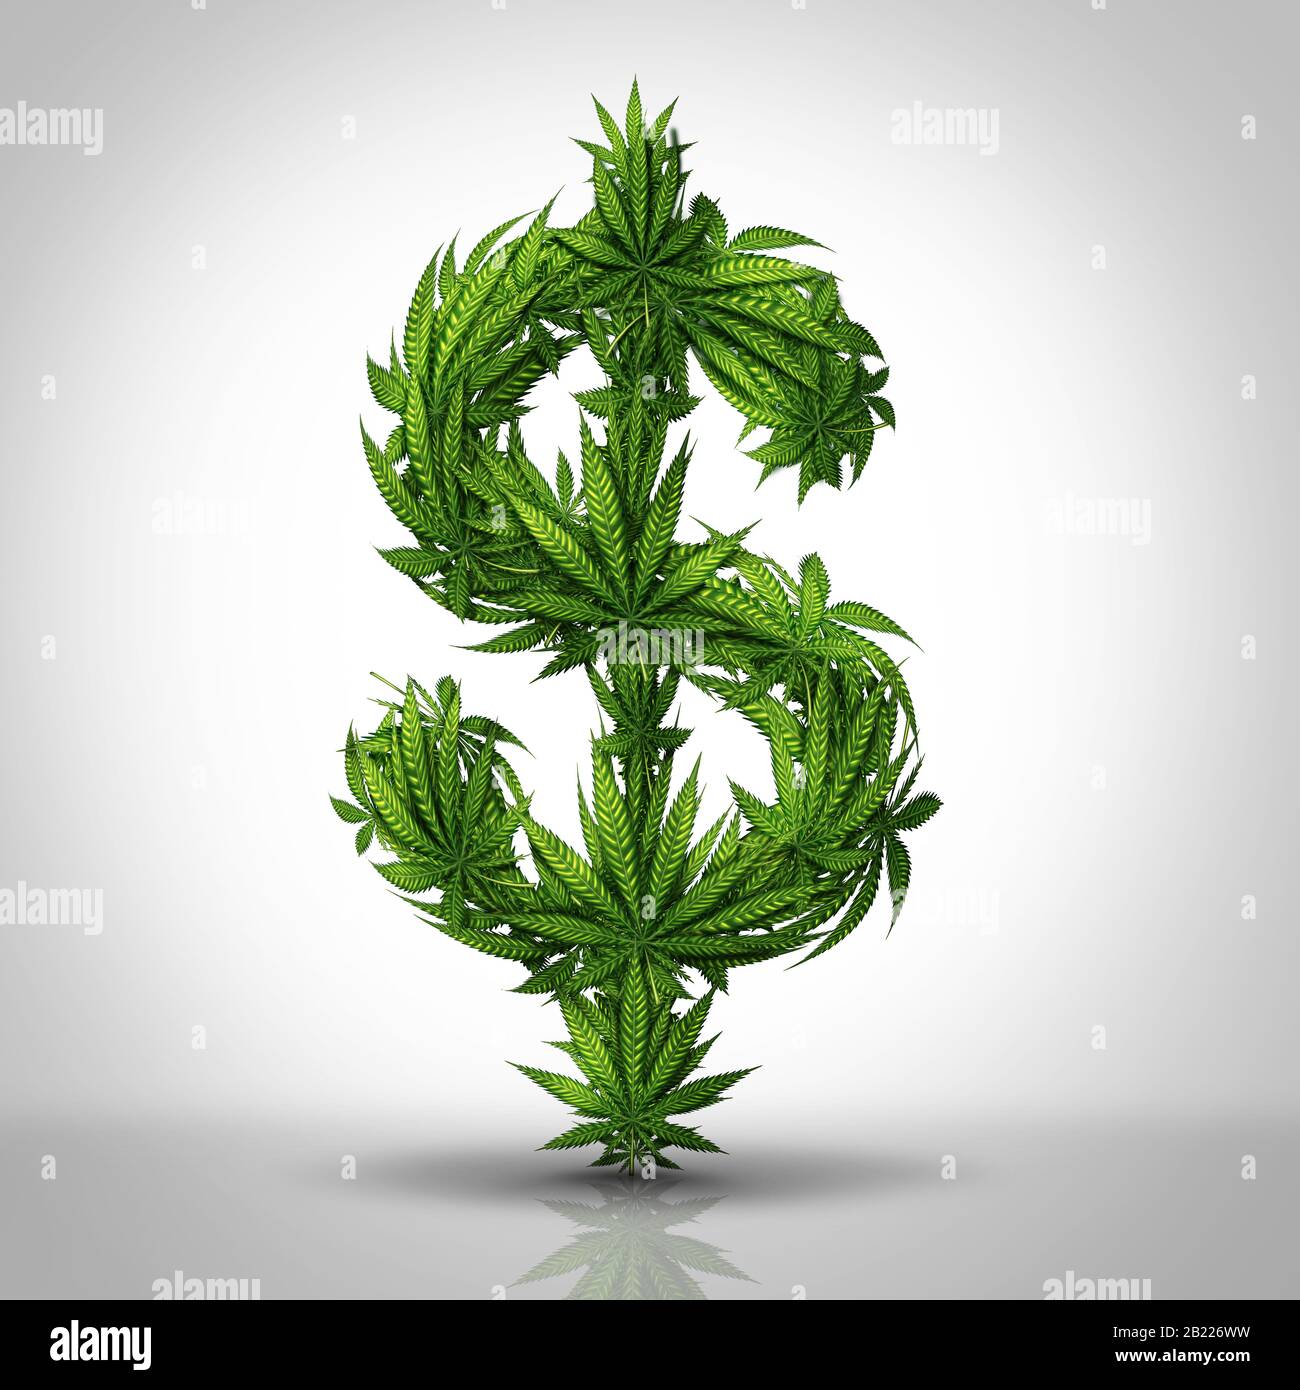 Cannabis business and marijuana industry concept as leaves shaped as a dollar sign in a 3D illustration style. Stock Photo